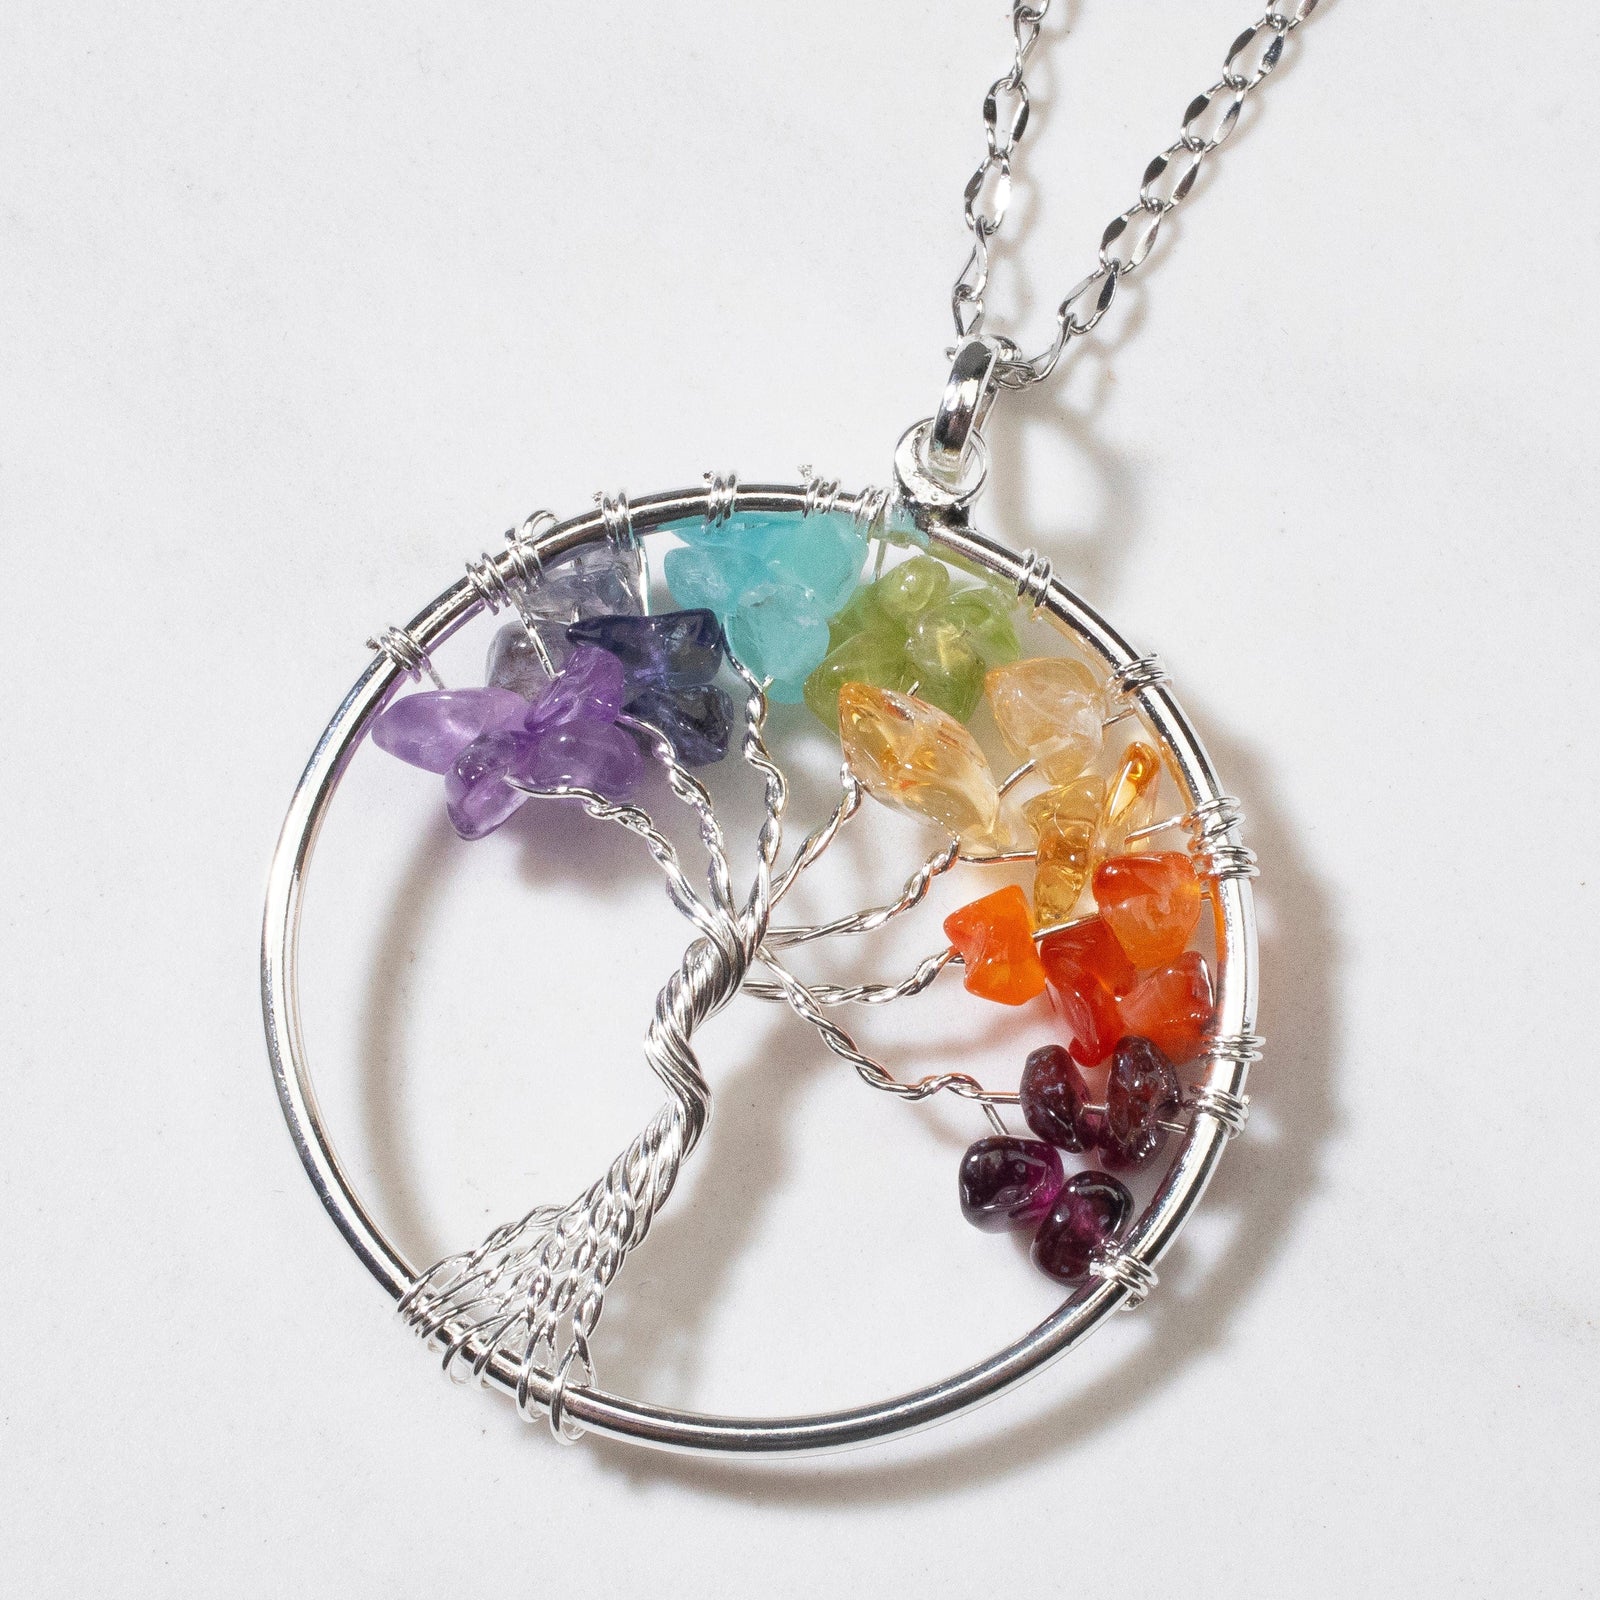 Crystal Jewelry: How To Make It, Where To Buy It & More